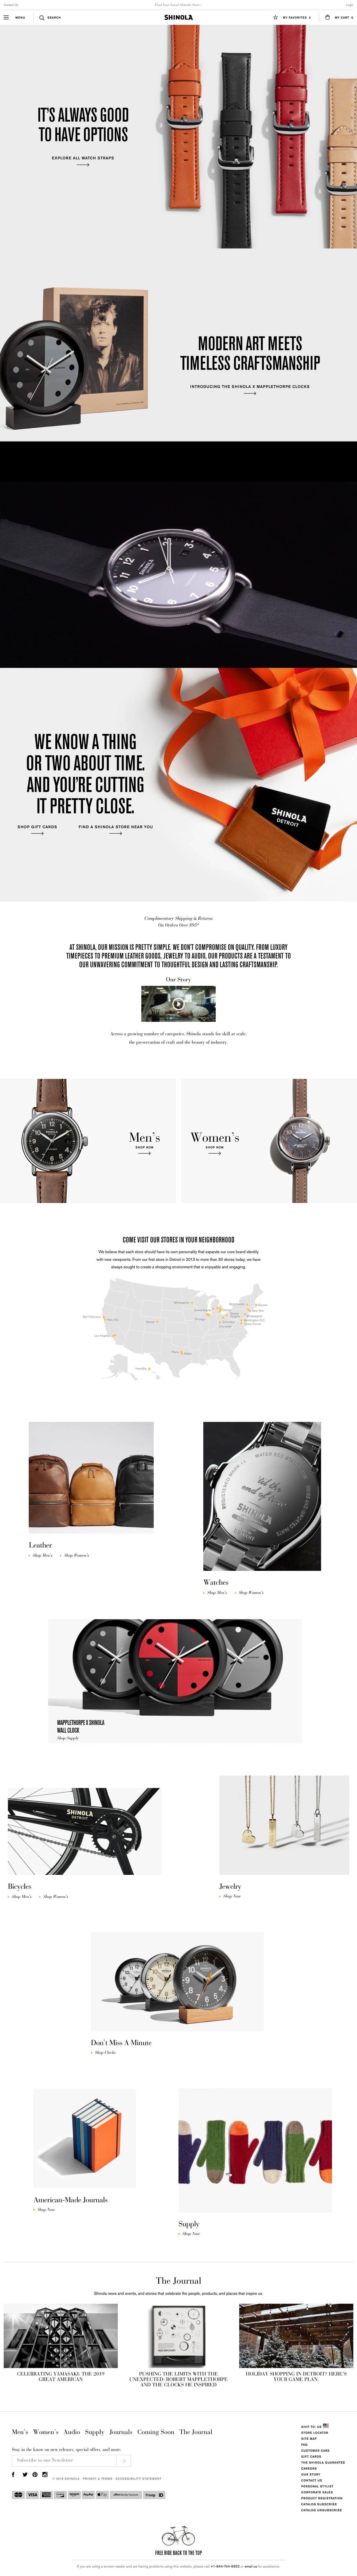 Shinola Landing Page Example: At Shinola, our mission is pretty simple. We don't compromise on quality. From luxury timepieces to premium leather goods, jewelry to audio, our products are a testament toour unwavering commitment to thoughtful design and lasting craftsmanship.